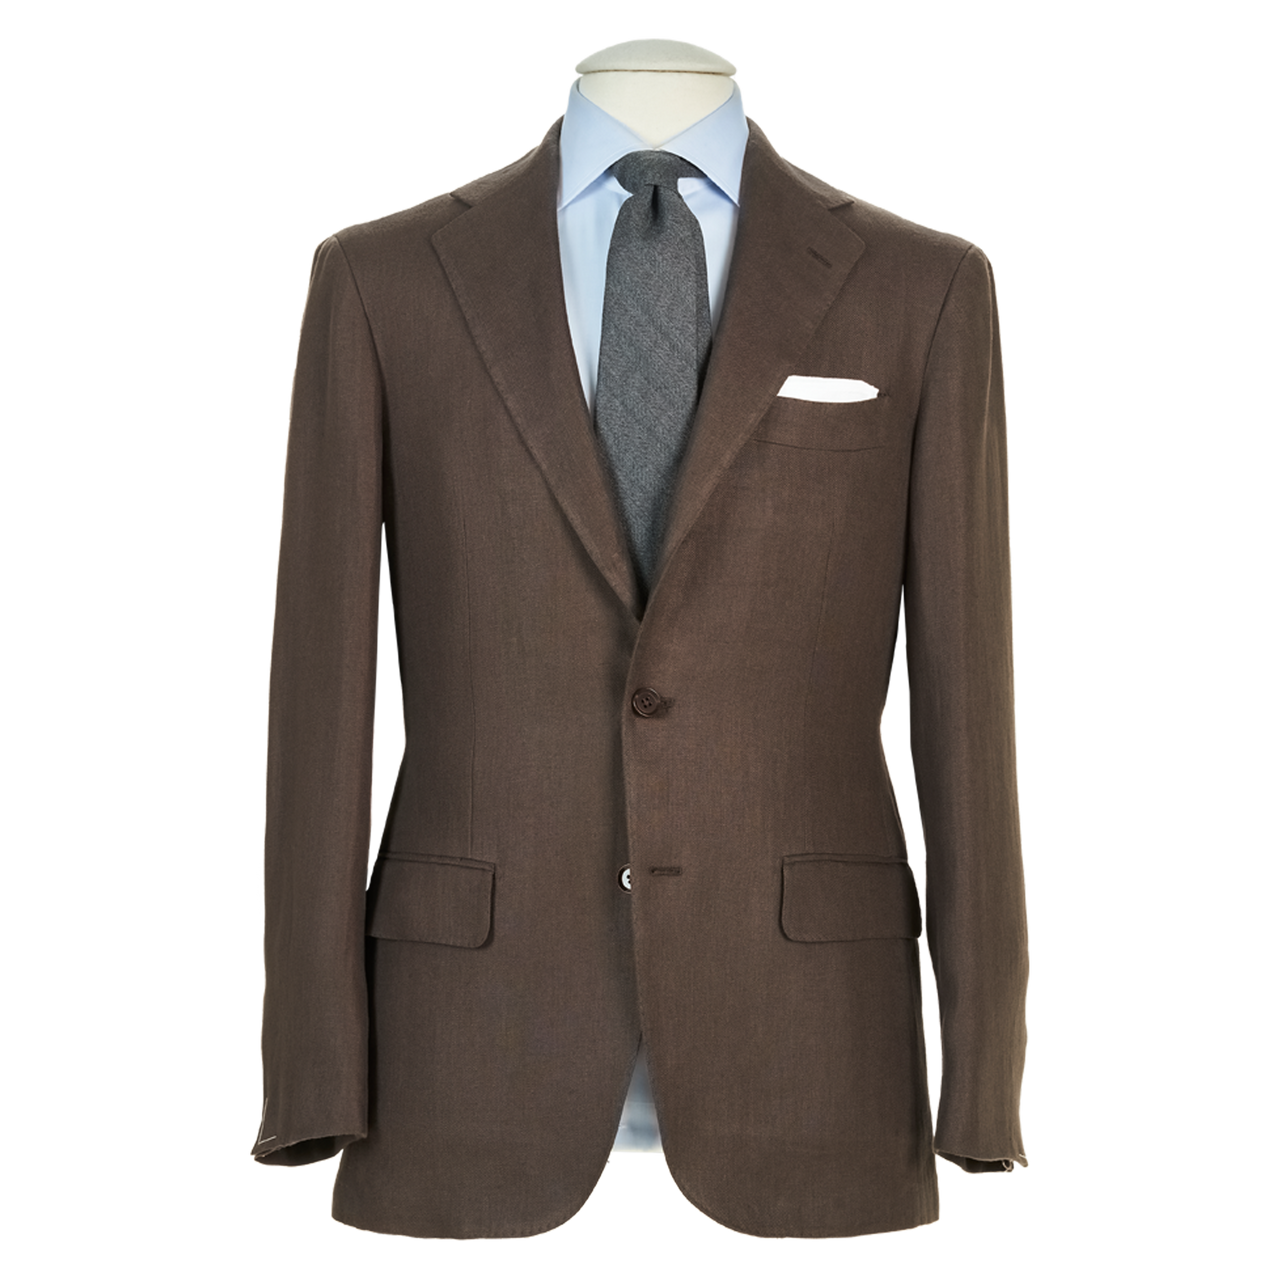 Ring Jacket Suit 301A-S187 in Cigar Brown Linen Twill